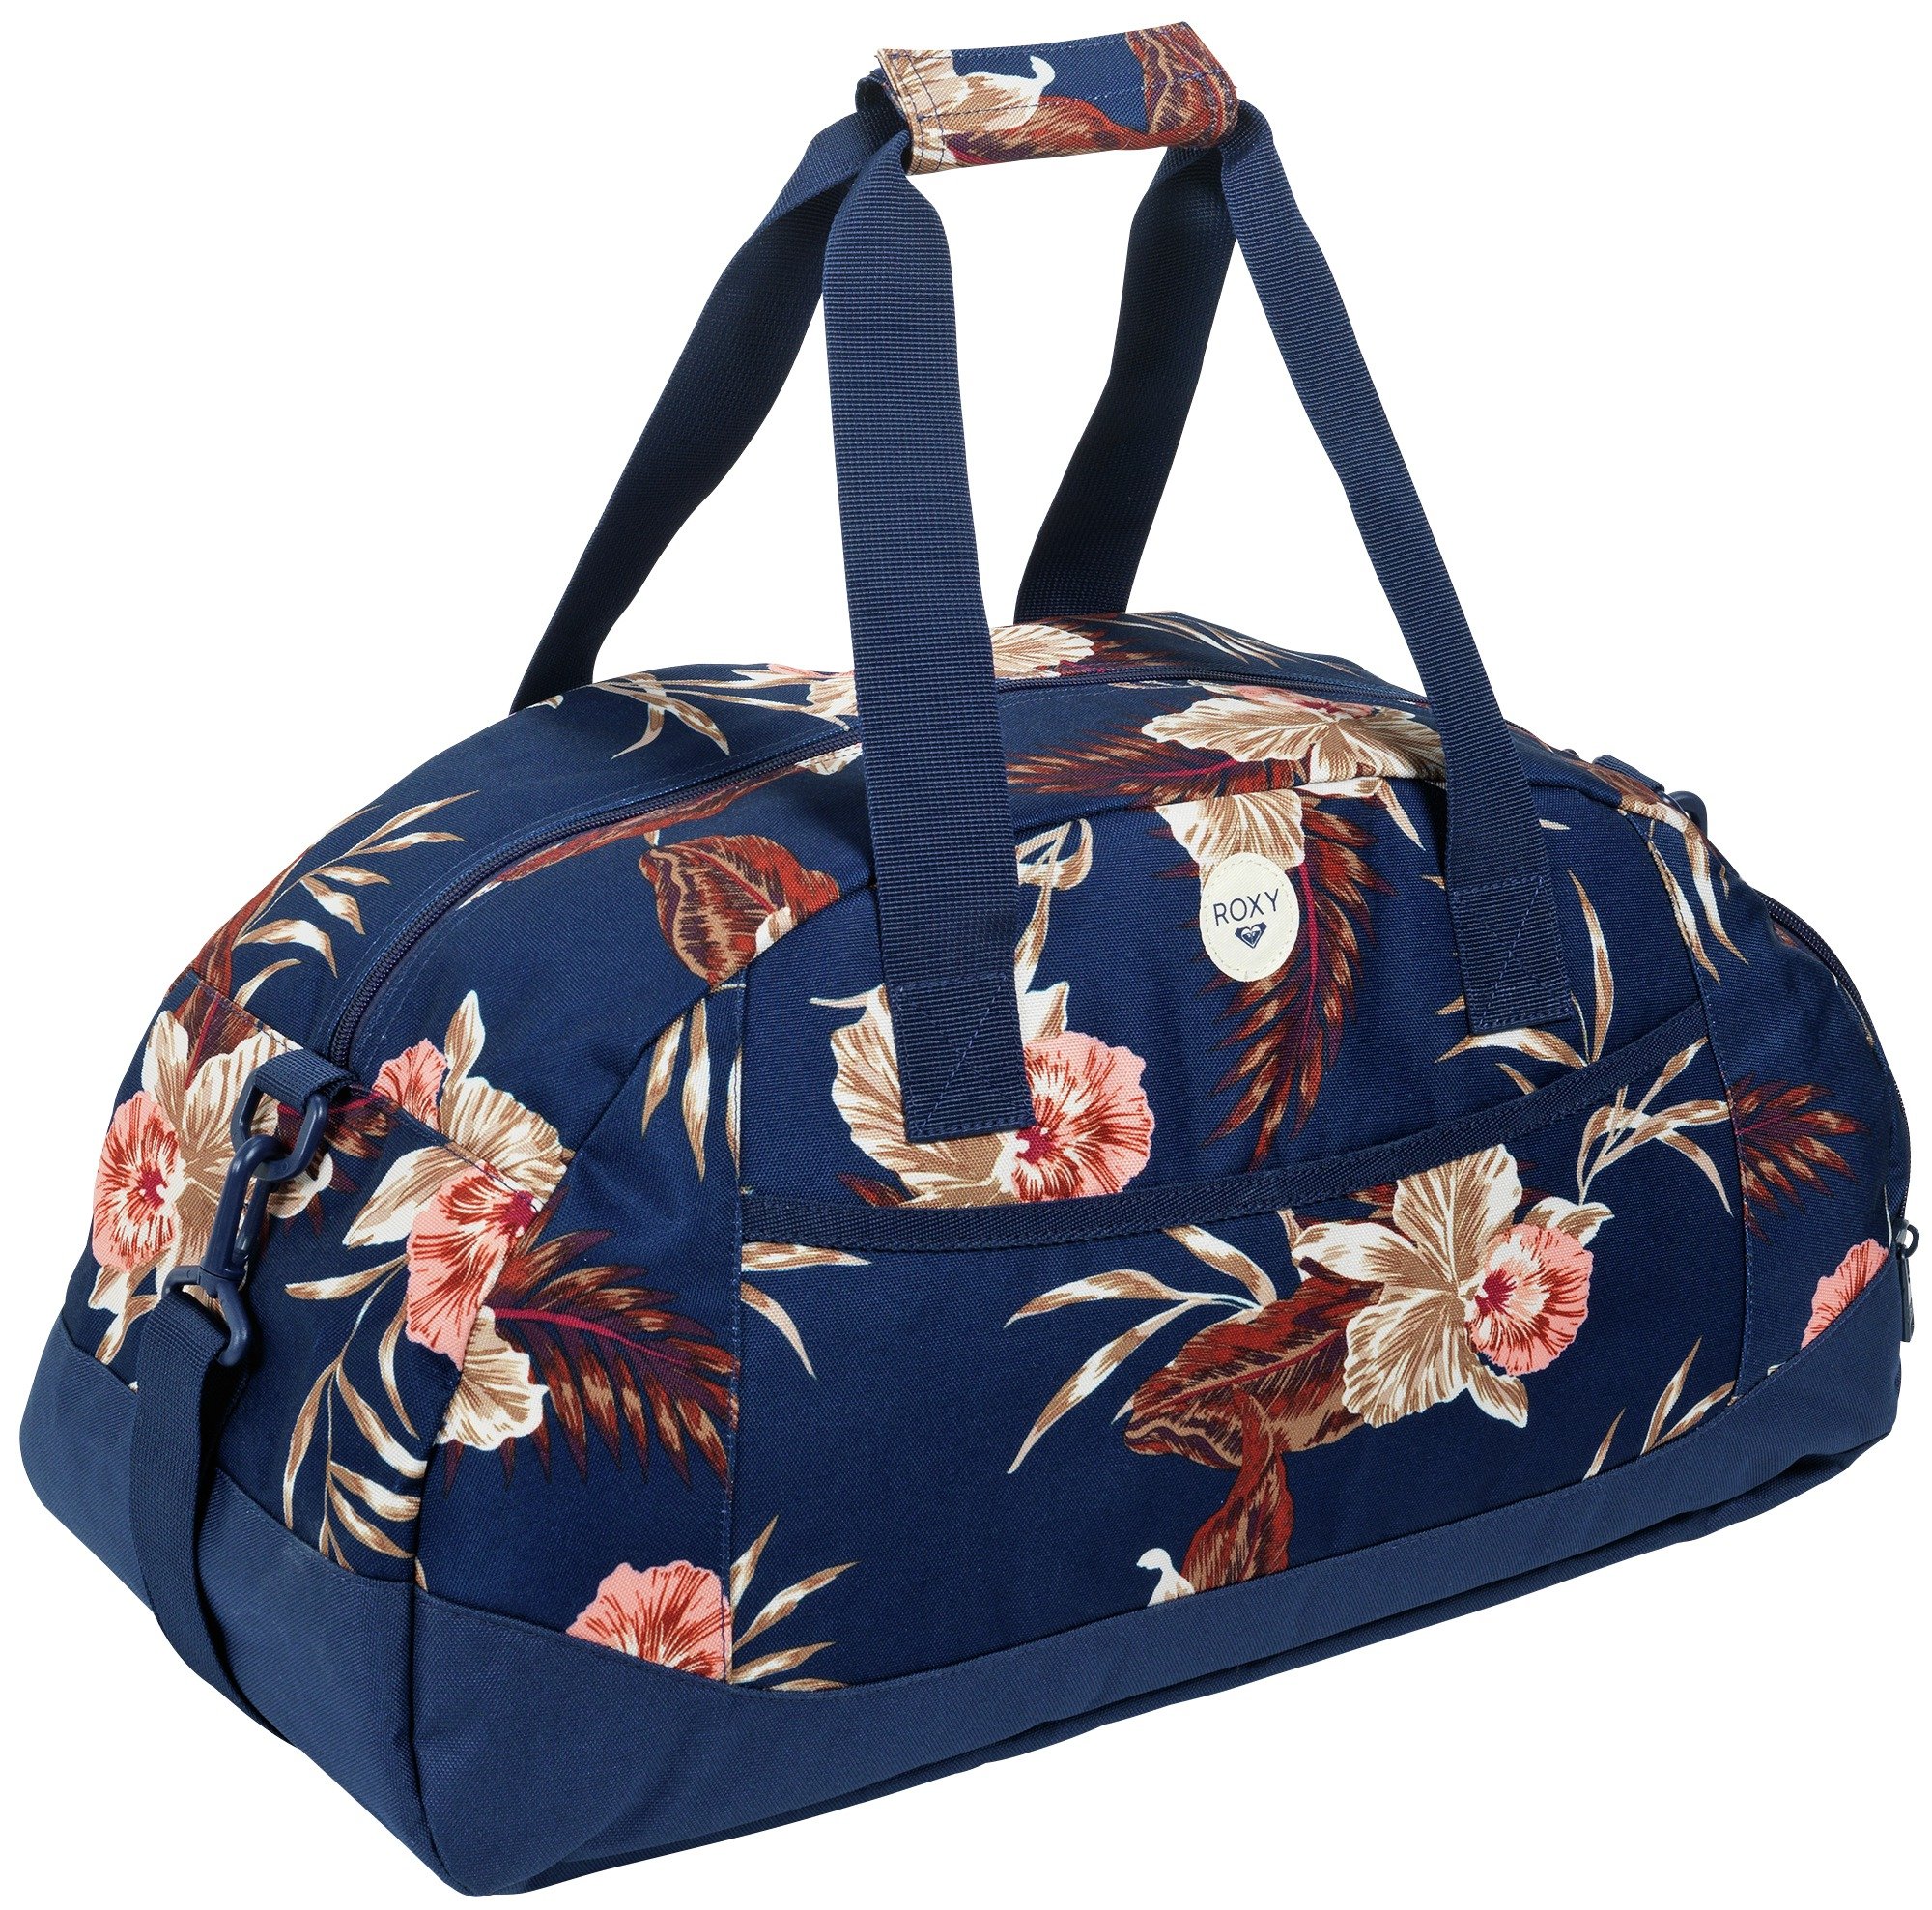 Review of Roxy Floral Holdall Bag - Small